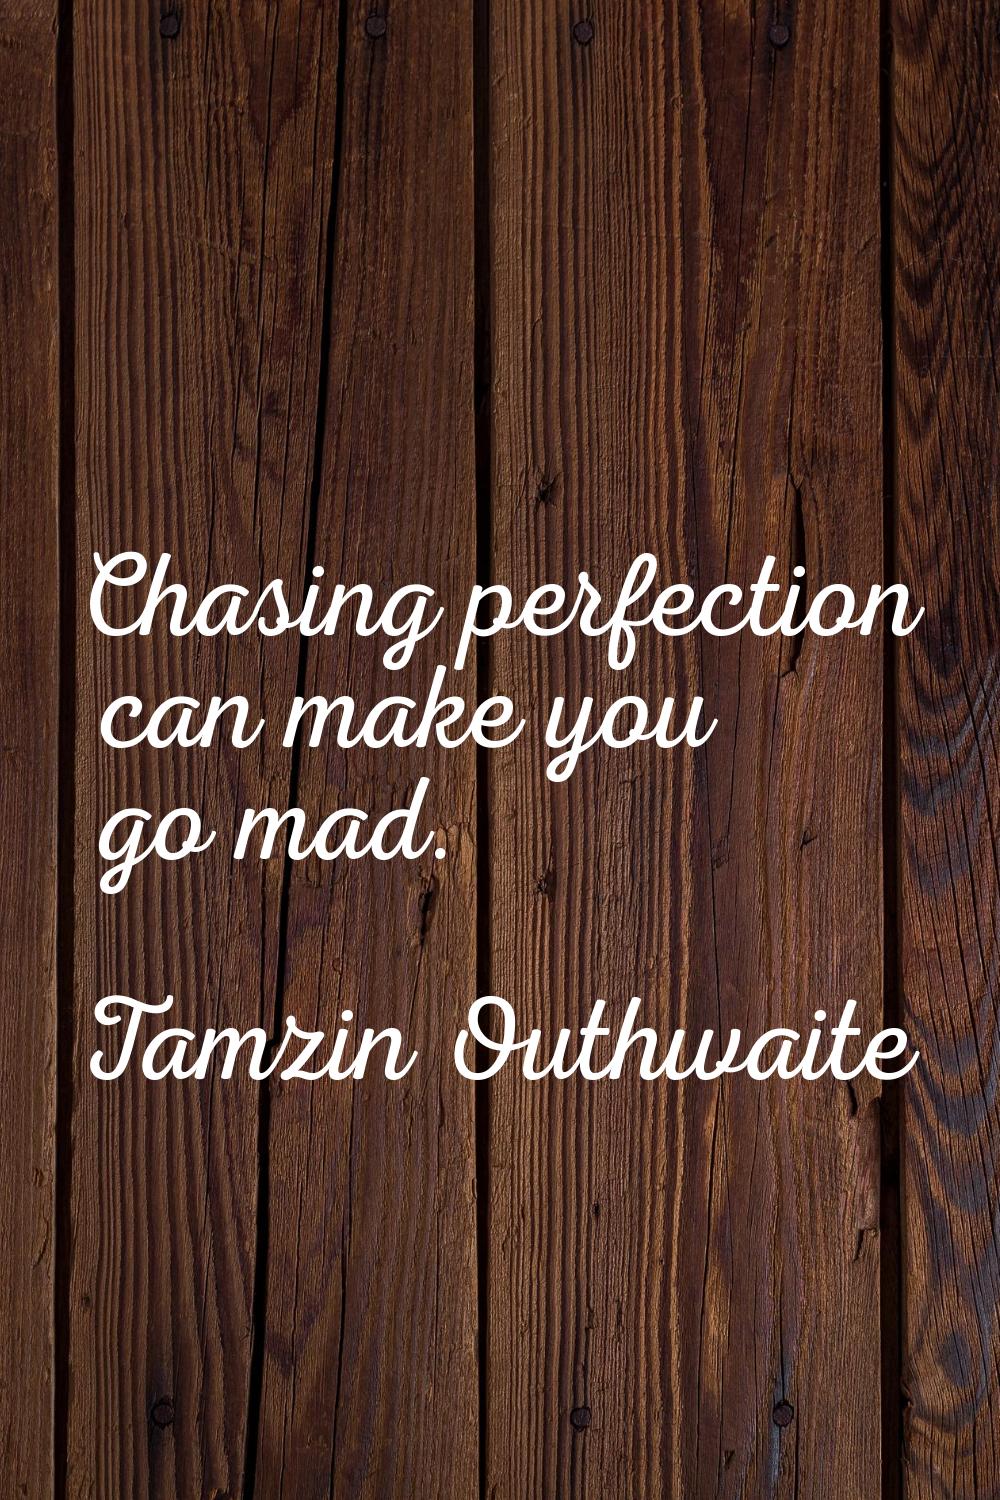 Chasing perfection can make you go mad.